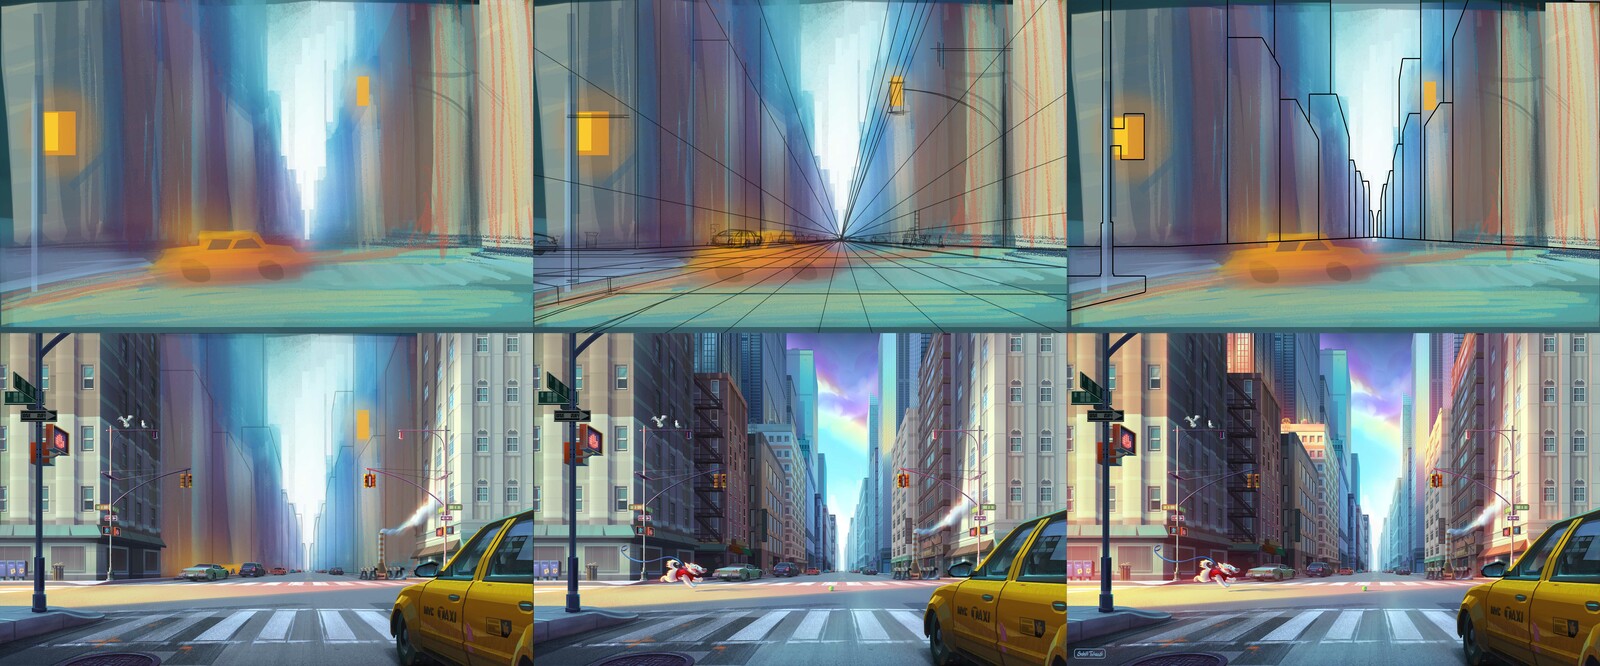 Rough thumbnail to final output.

Went through a lot of iterations &amp; changes in visuals during process. But, made sure all the elements/color palette are reflecting a simple story &amp; a visual treat of fresh morning of New York. 